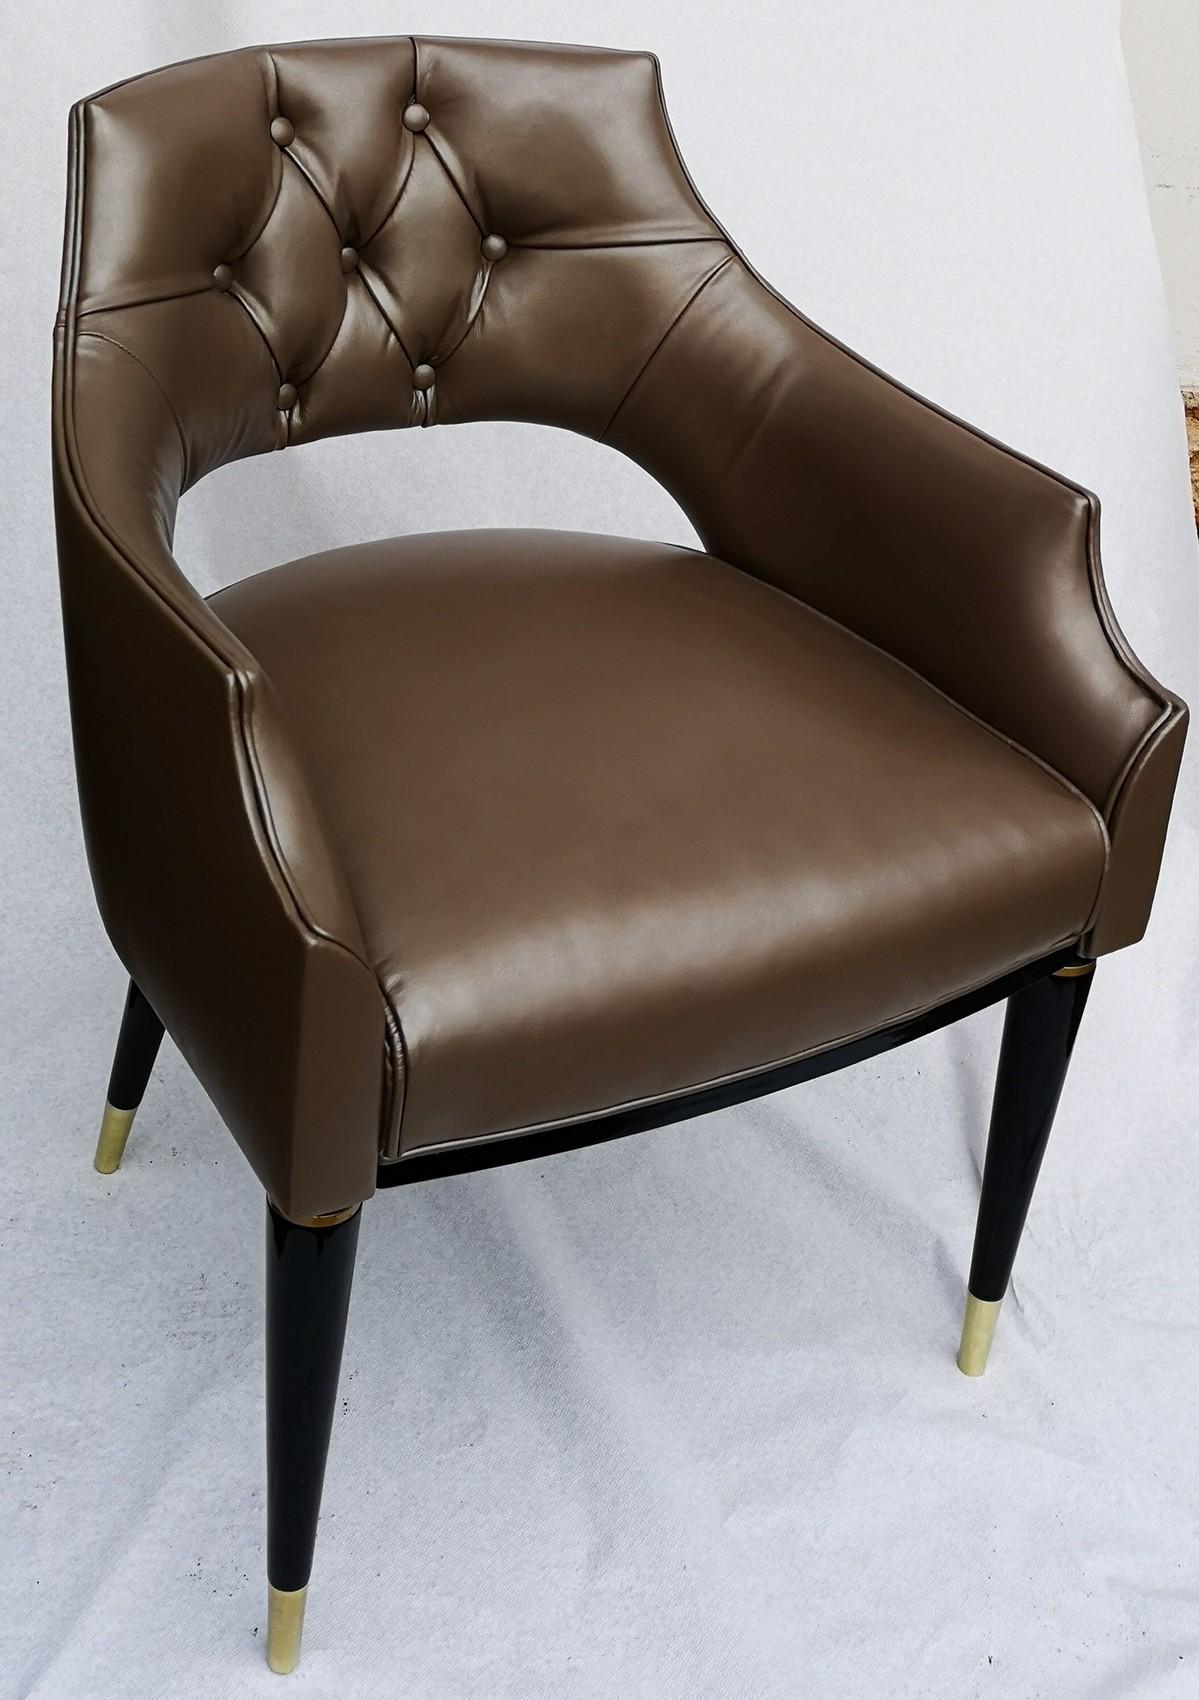 Dining Armchair, Tufted Fiore Italian Leather, Midcentury Style, Luxury Details 7